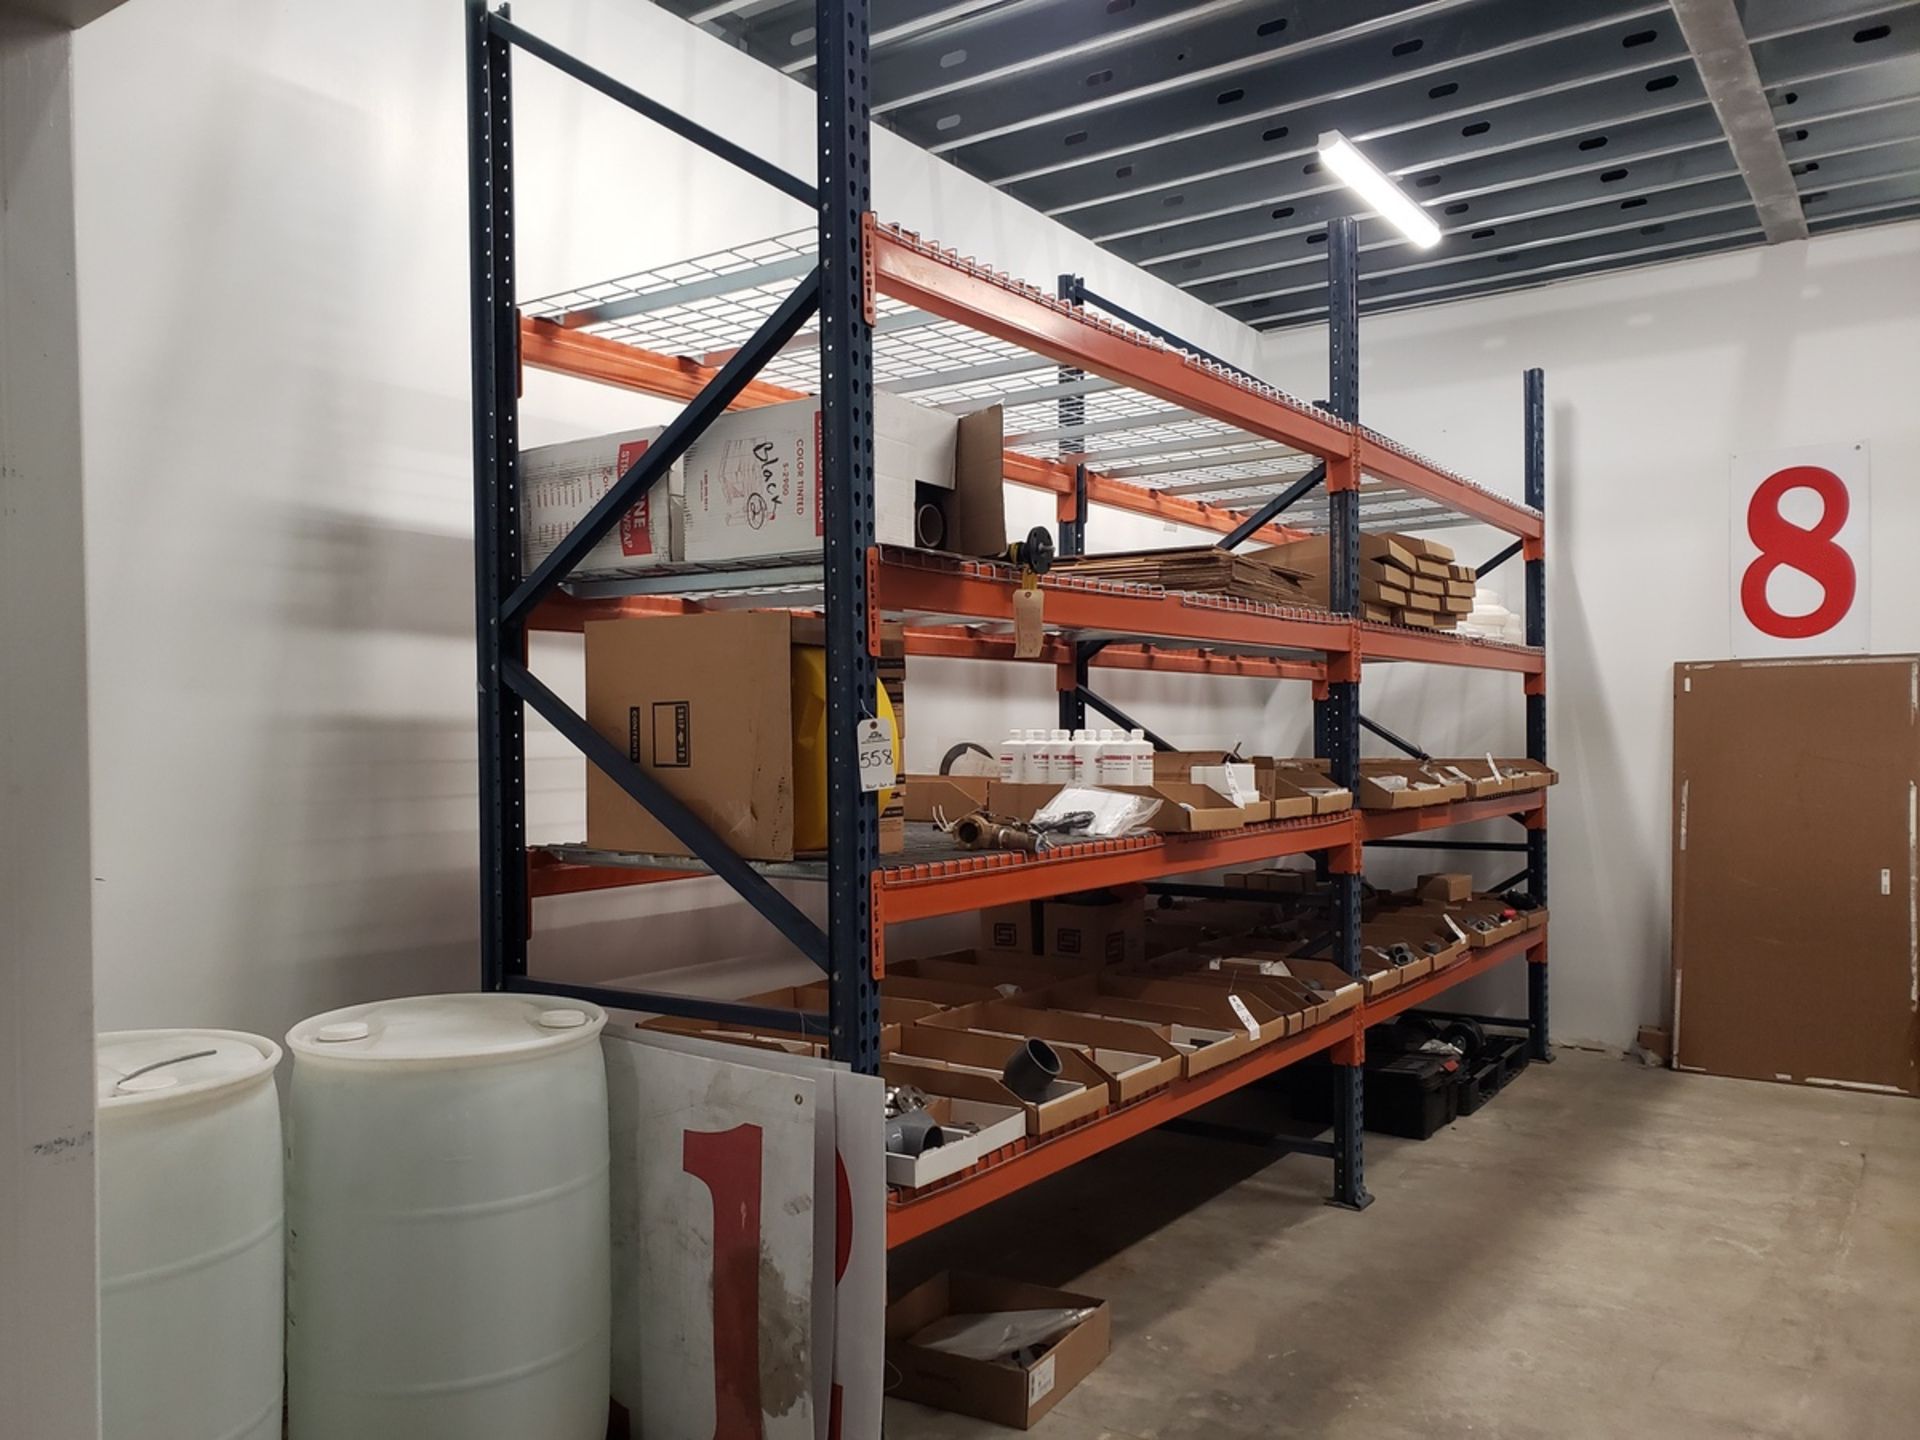 Lot of Pallet Racking, (6) Uprights, 42" x 10', (30) 8' Beams | Rig Fee $600